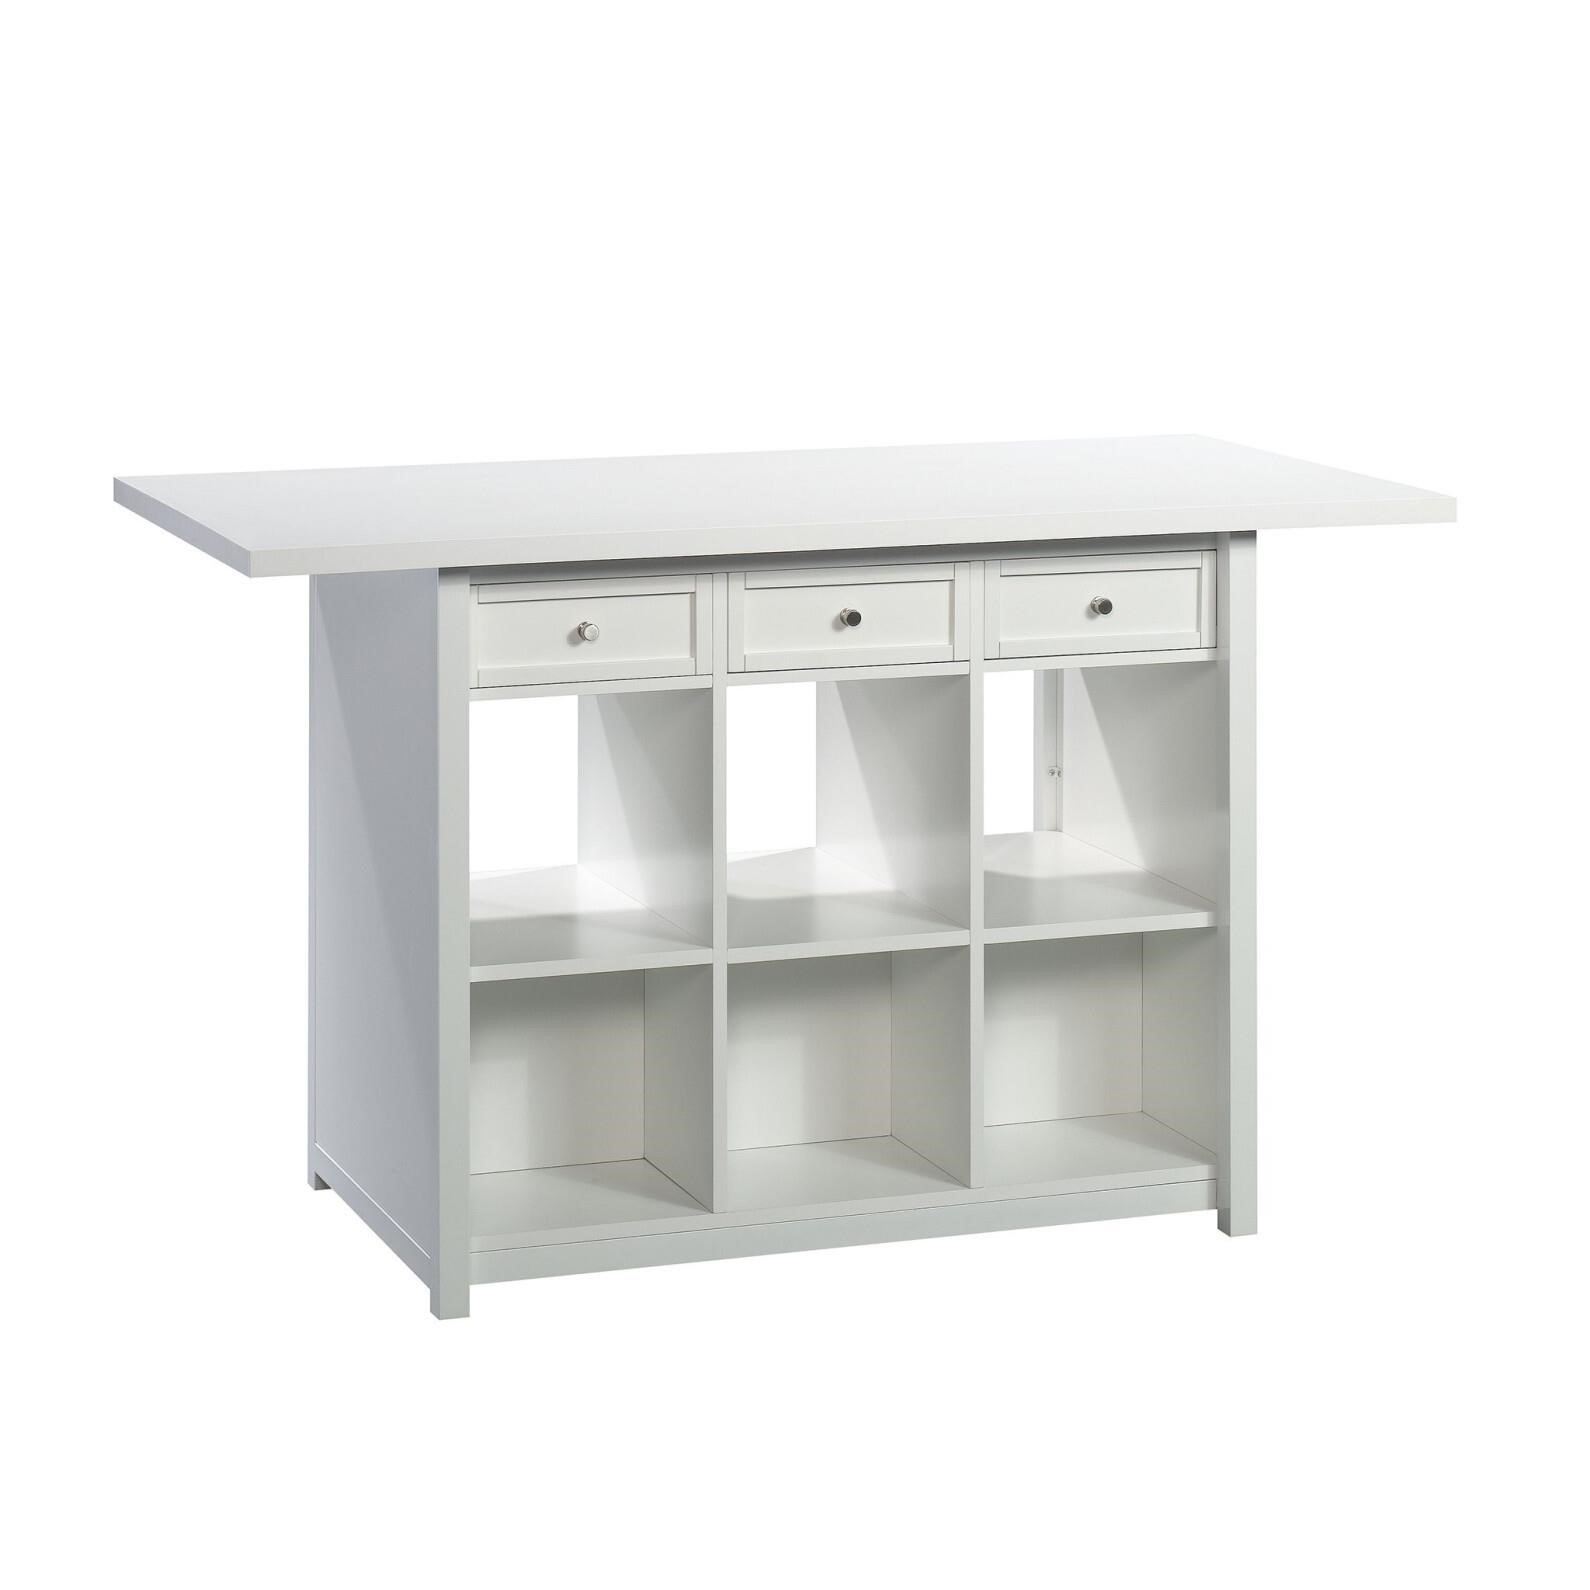 Sauder Craft Pro Series Work Table/Pantry cabinets